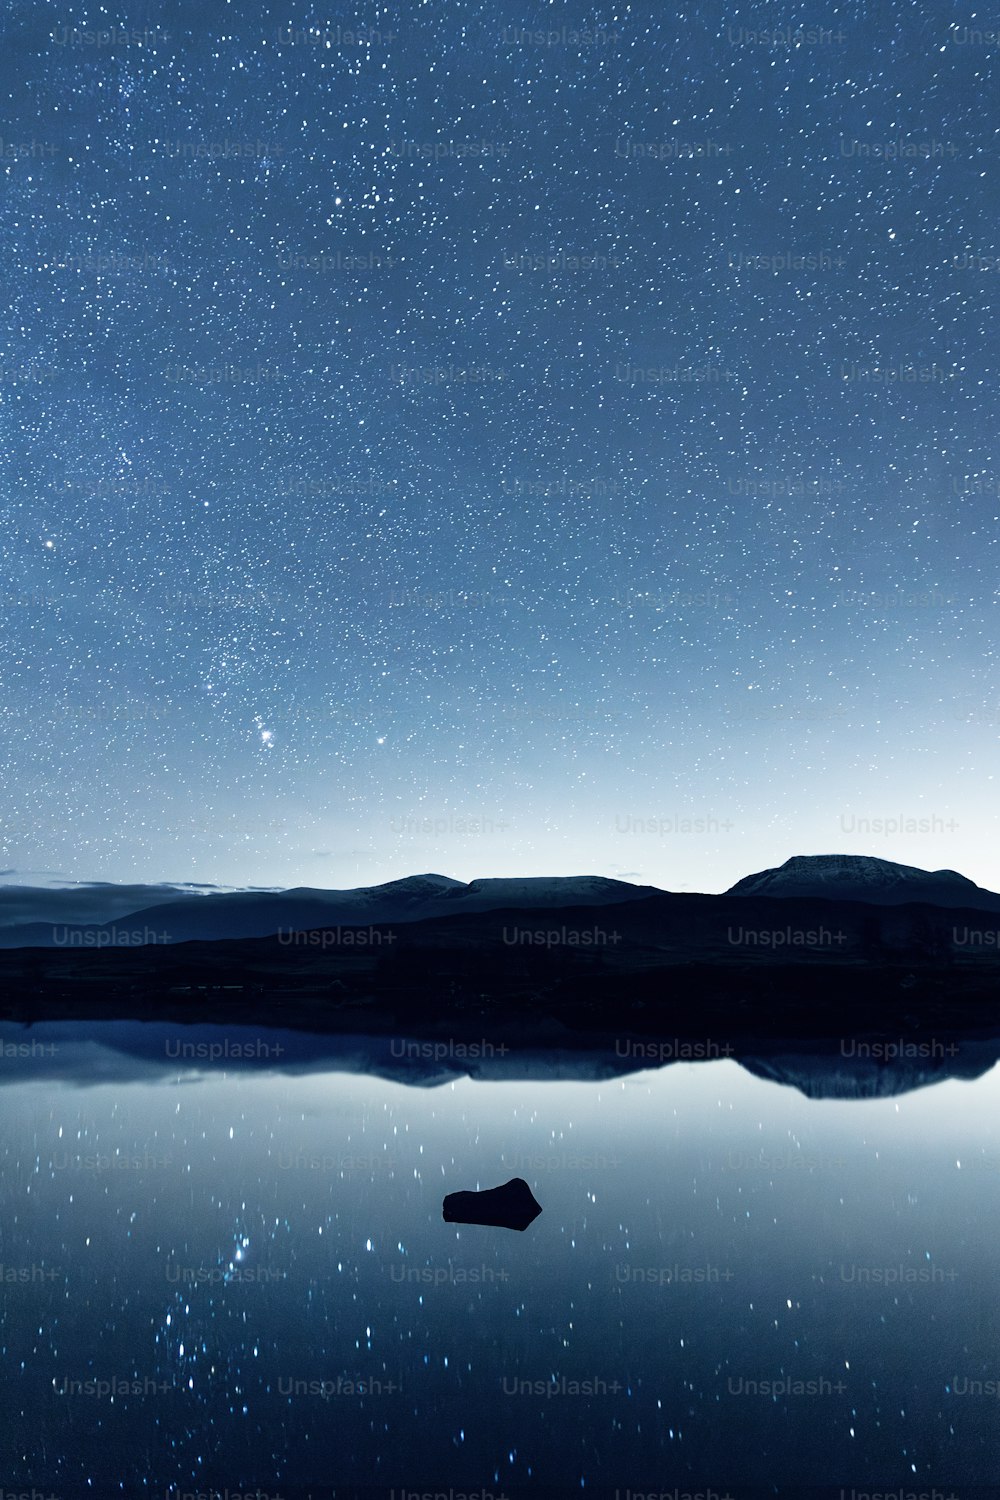 a body of water under a night sky filled with stars